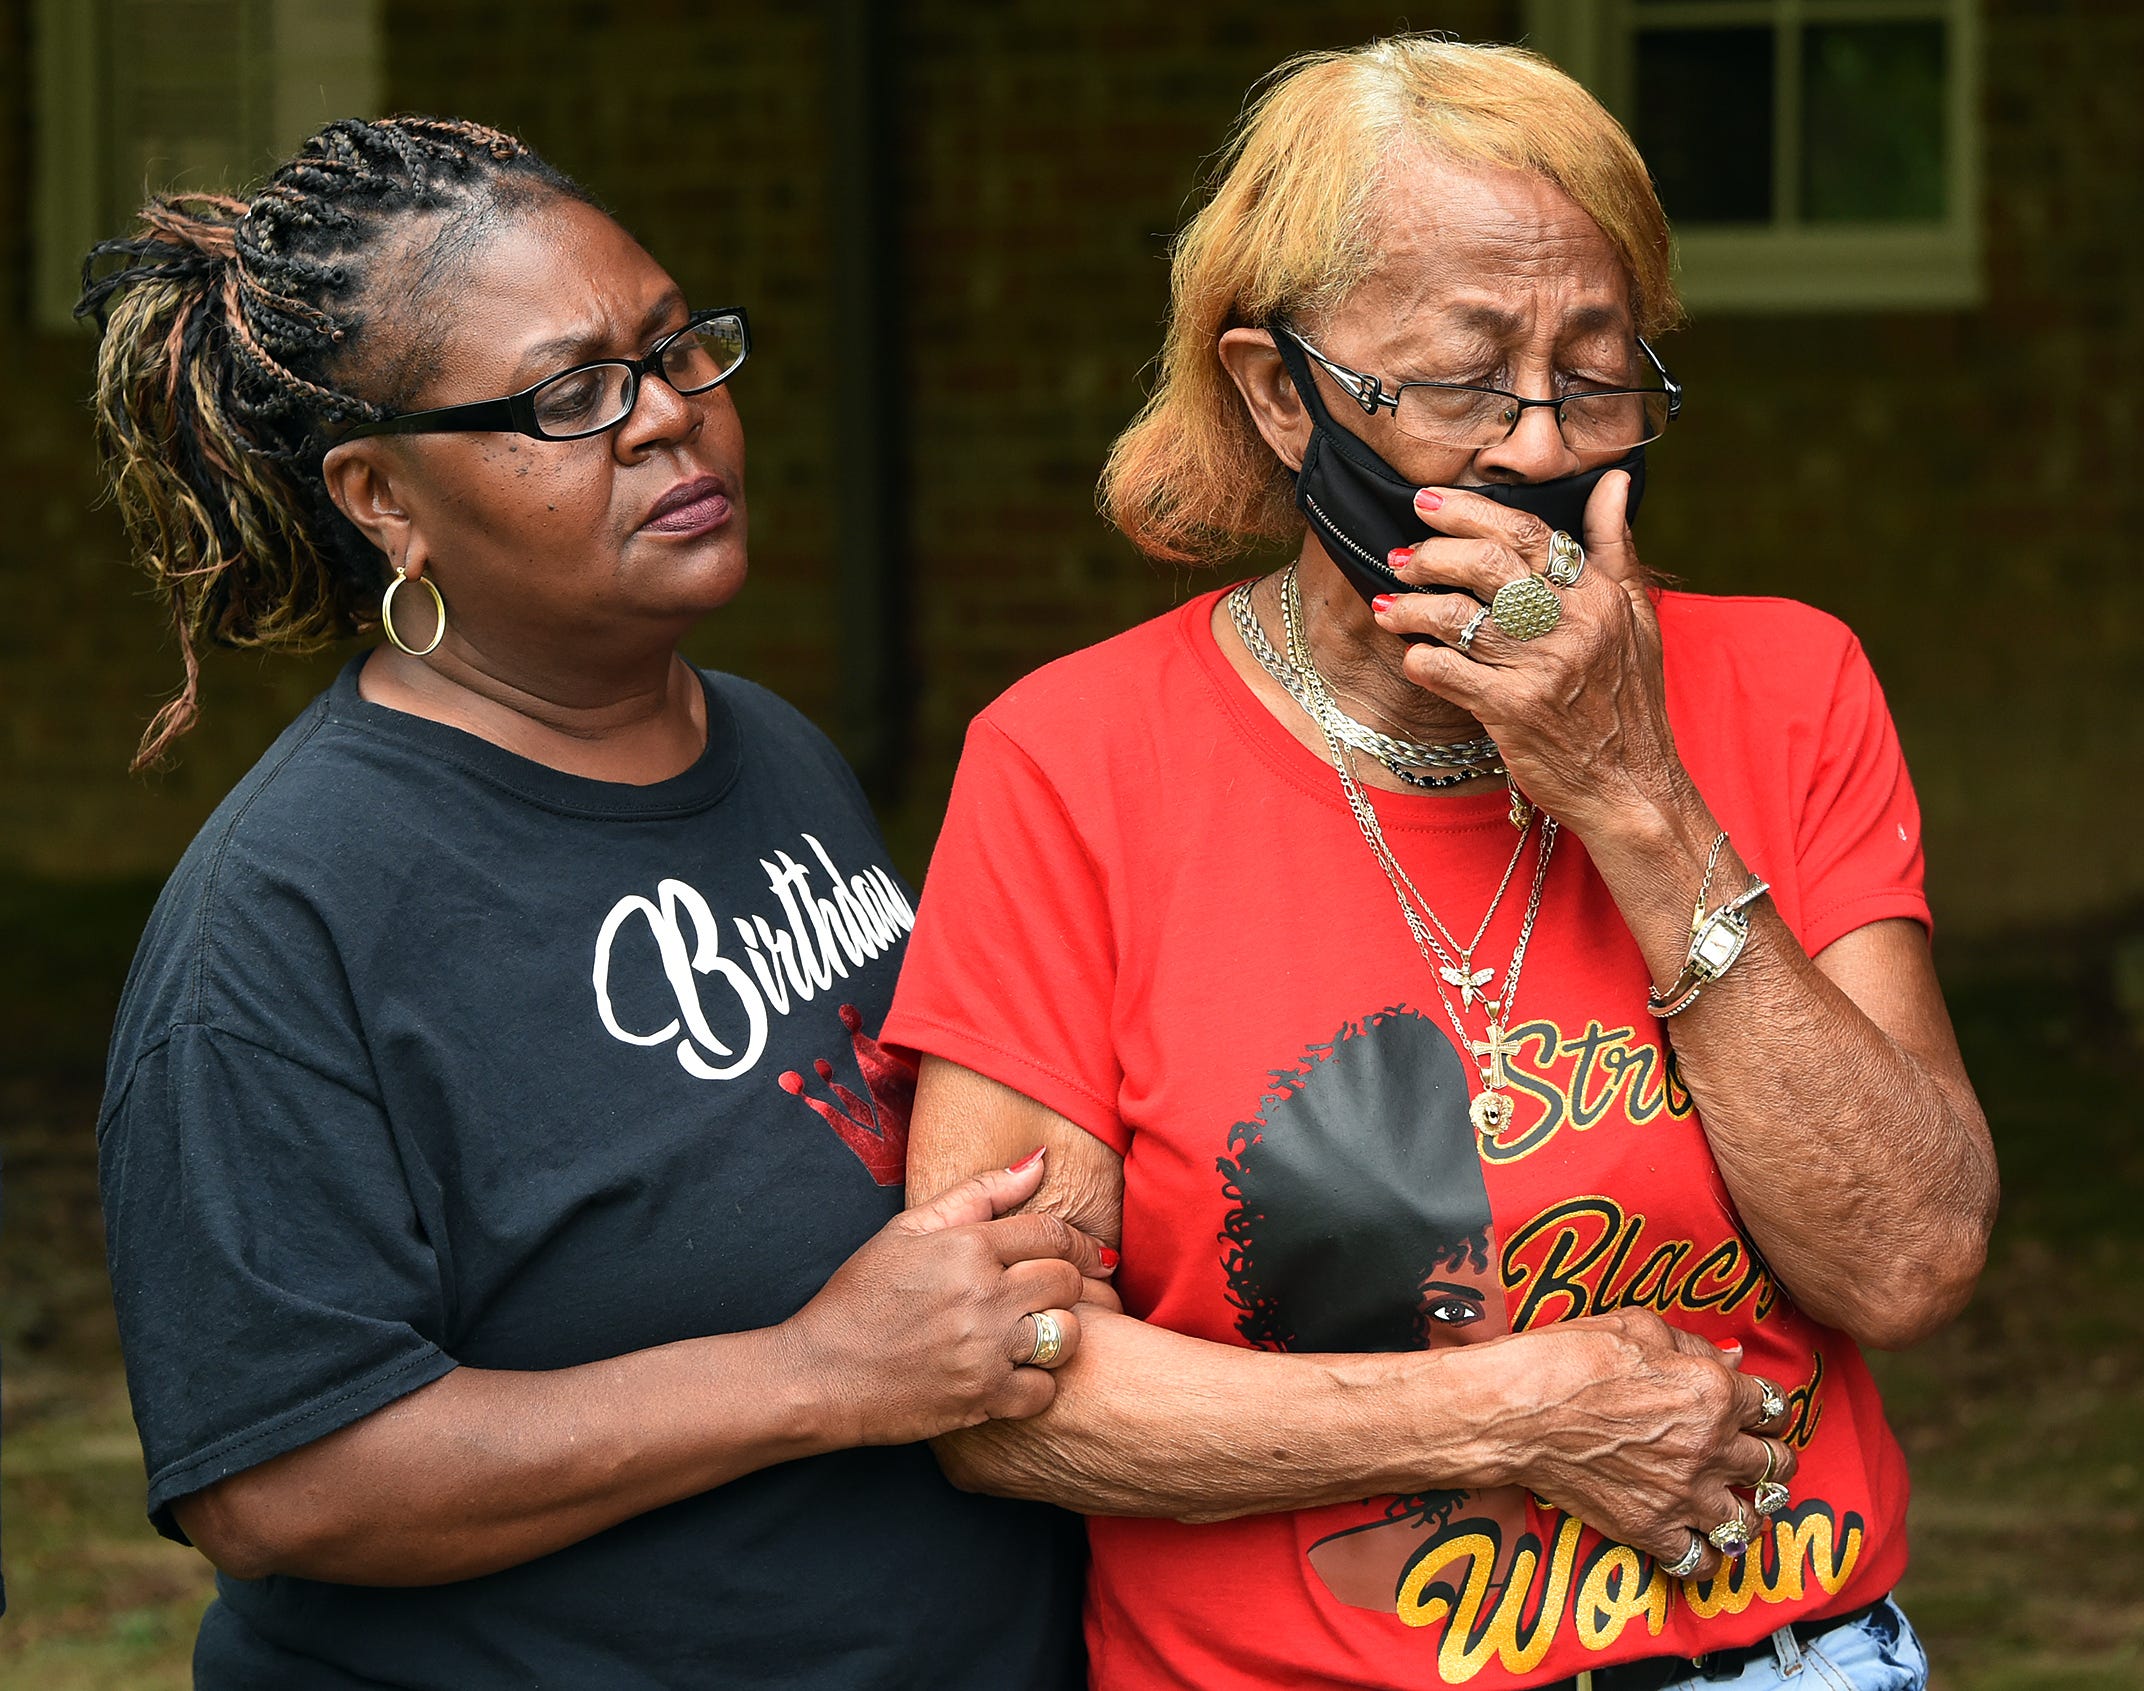 Joseph Pettaway’s sister, Jacqueline, comforts their mother, Lizzie Mae Pettaway. Joseph Pettaway died in July of 2018 at a home in Montgomery, Alabama, after being bitten by a police dog.